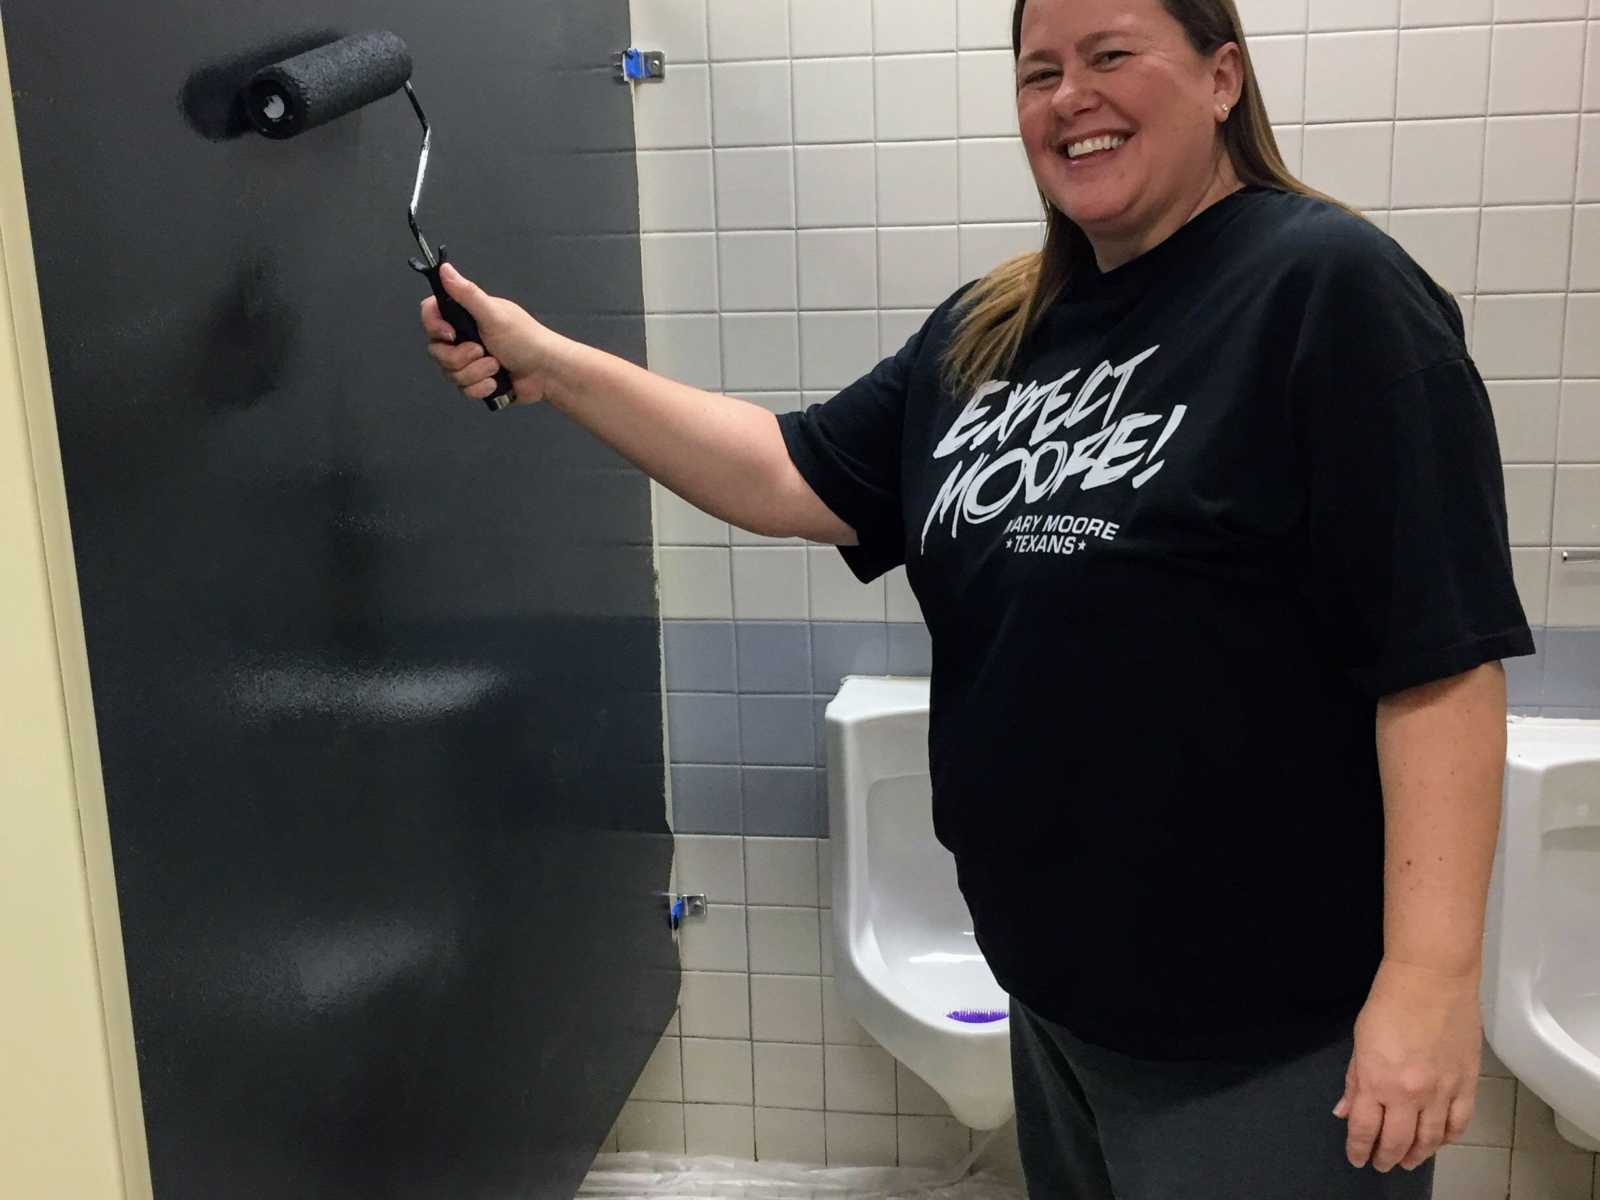 woman smiling in public restroom in front of urinals as she paints stall door black